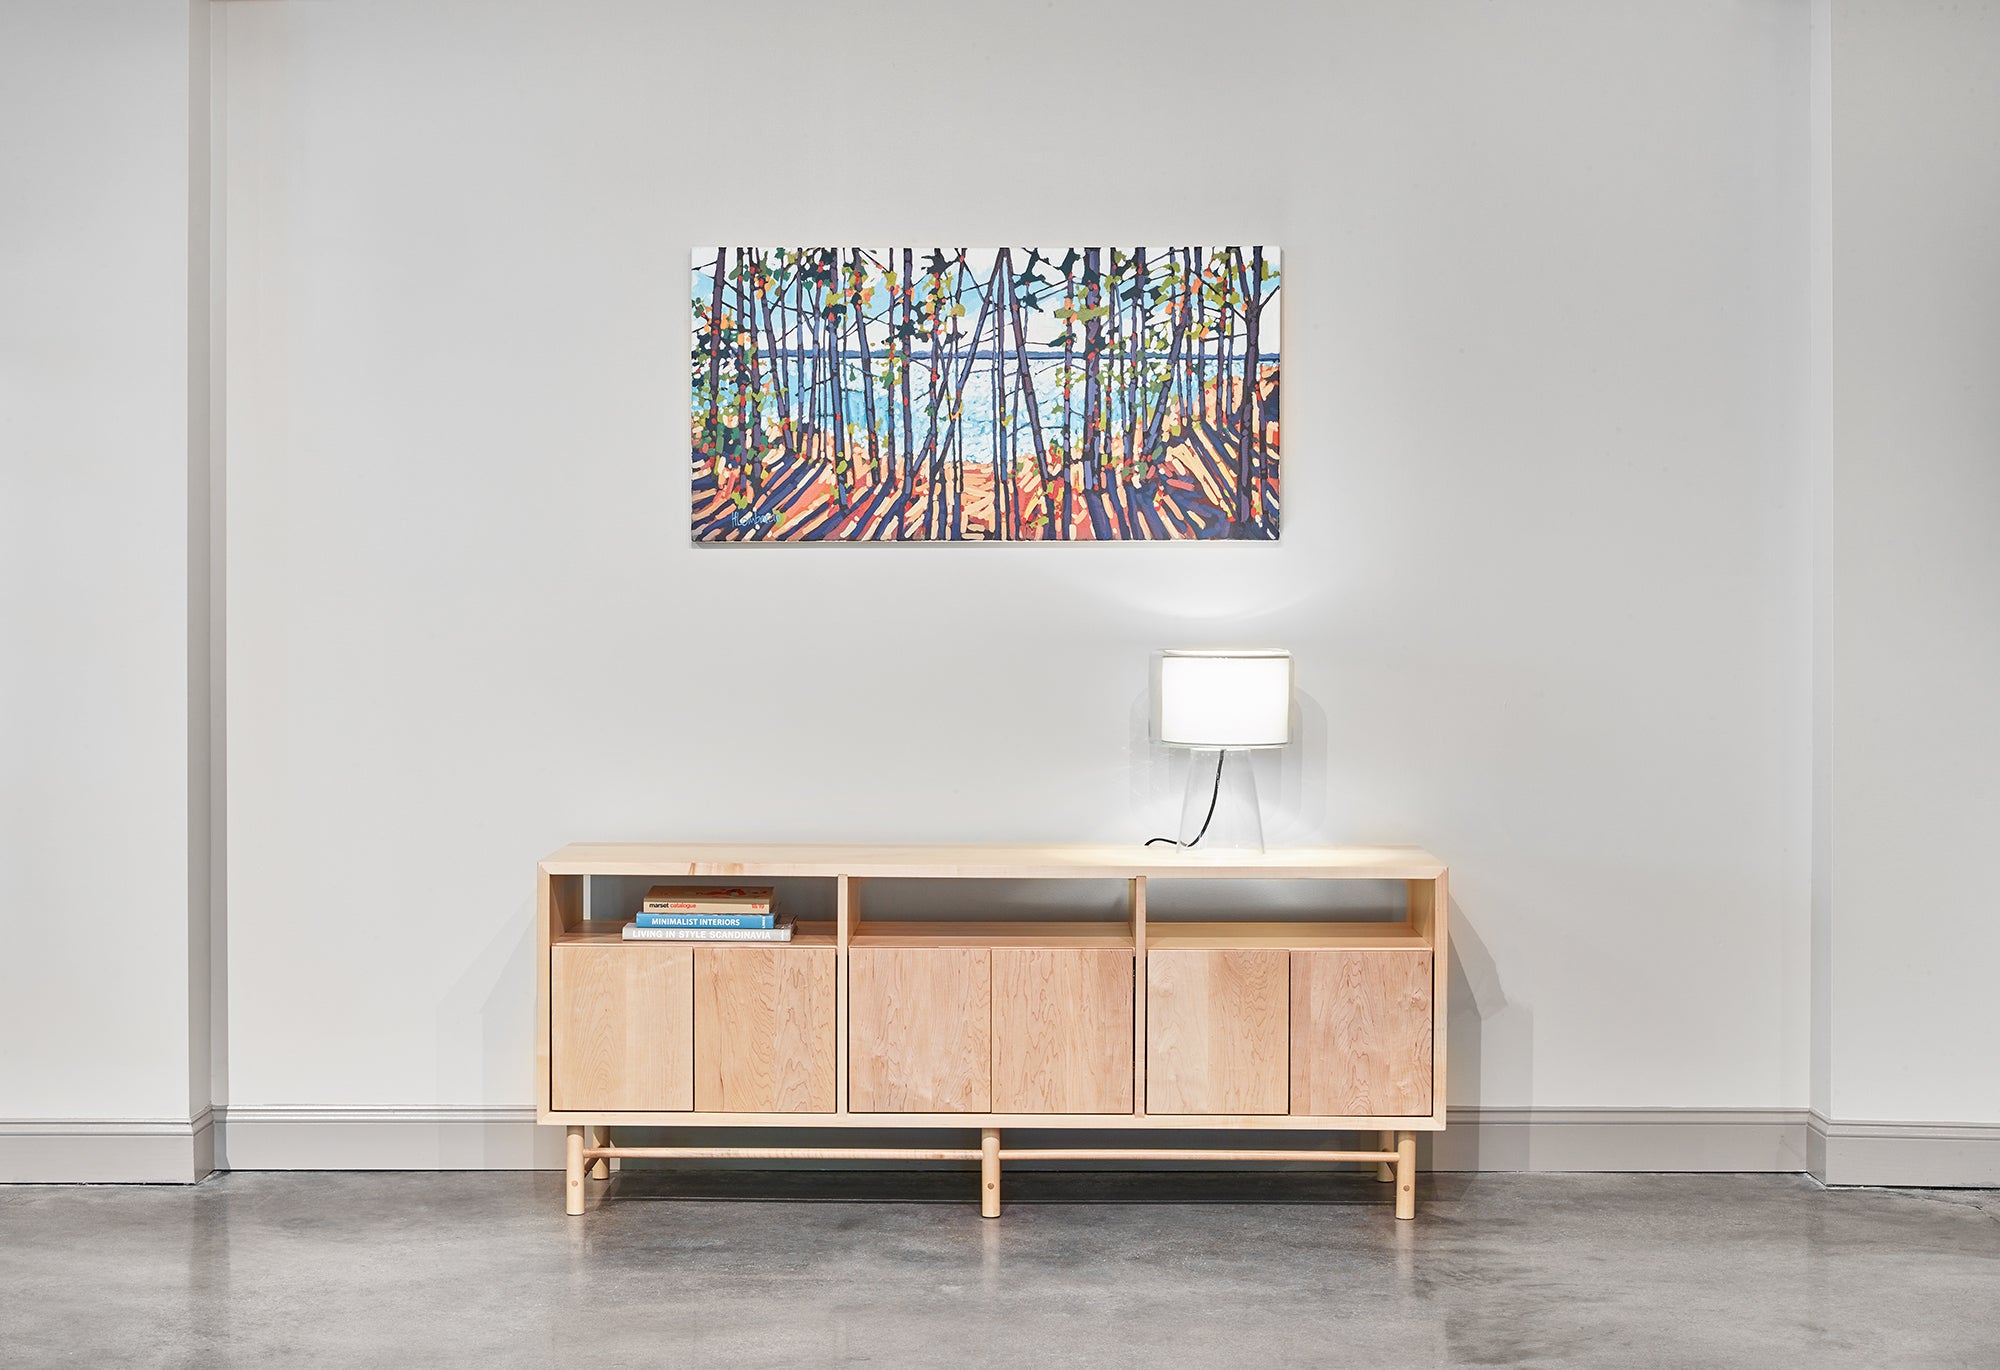 Industrial room with mid-century modern Navarend media case in solid maple with round legs and stretchers and an impressionism painting of trees